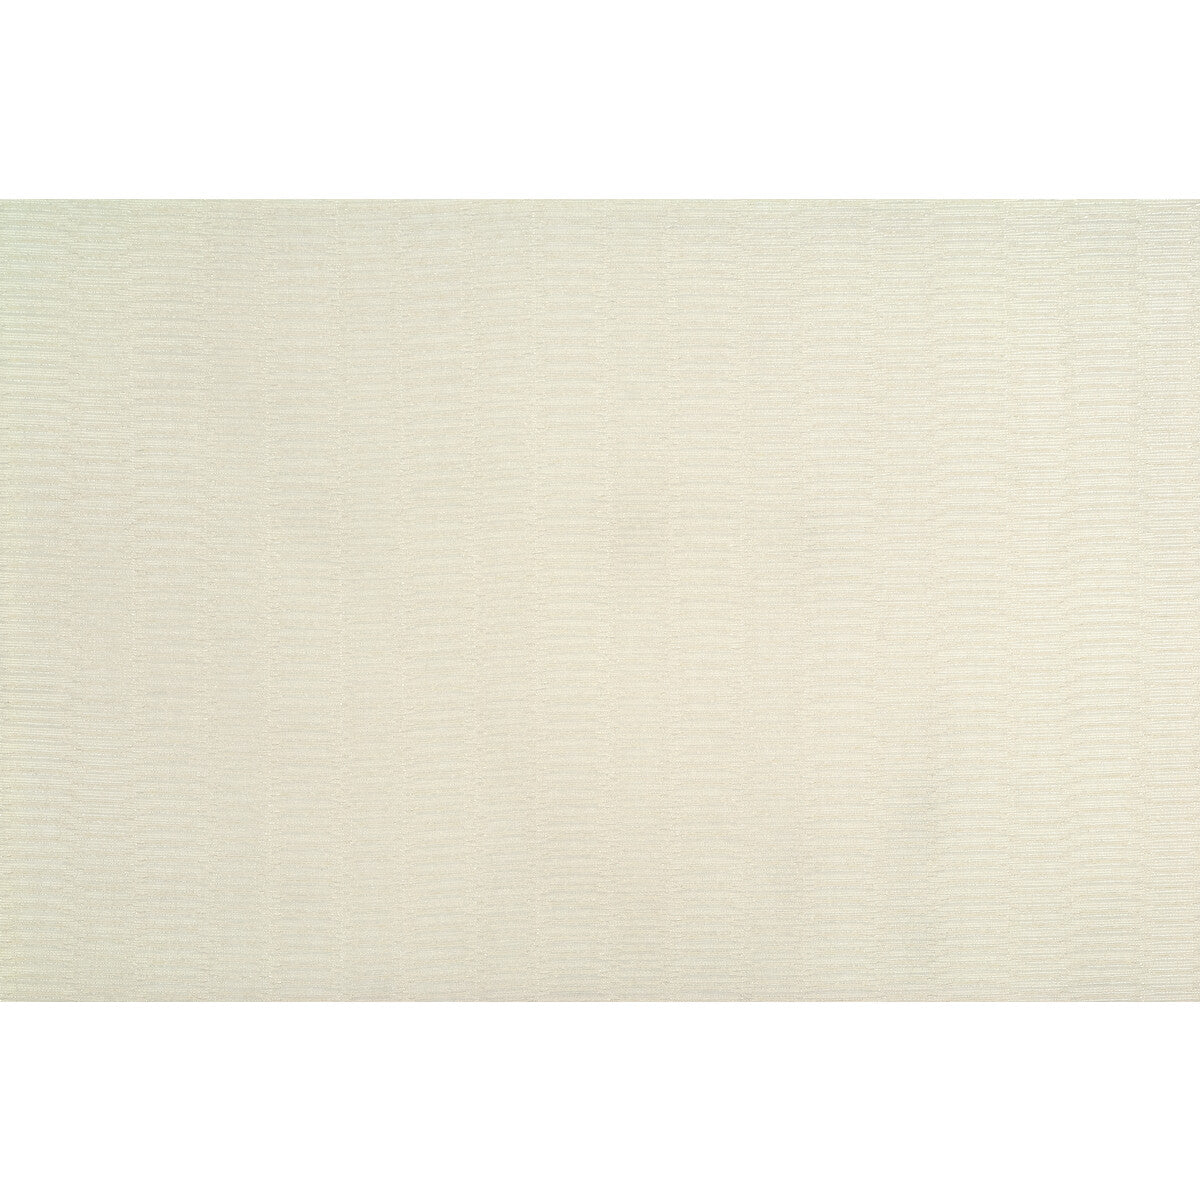 Thelma fabric in ivory color - pattern 4286.1.0 - by Kravet Contract